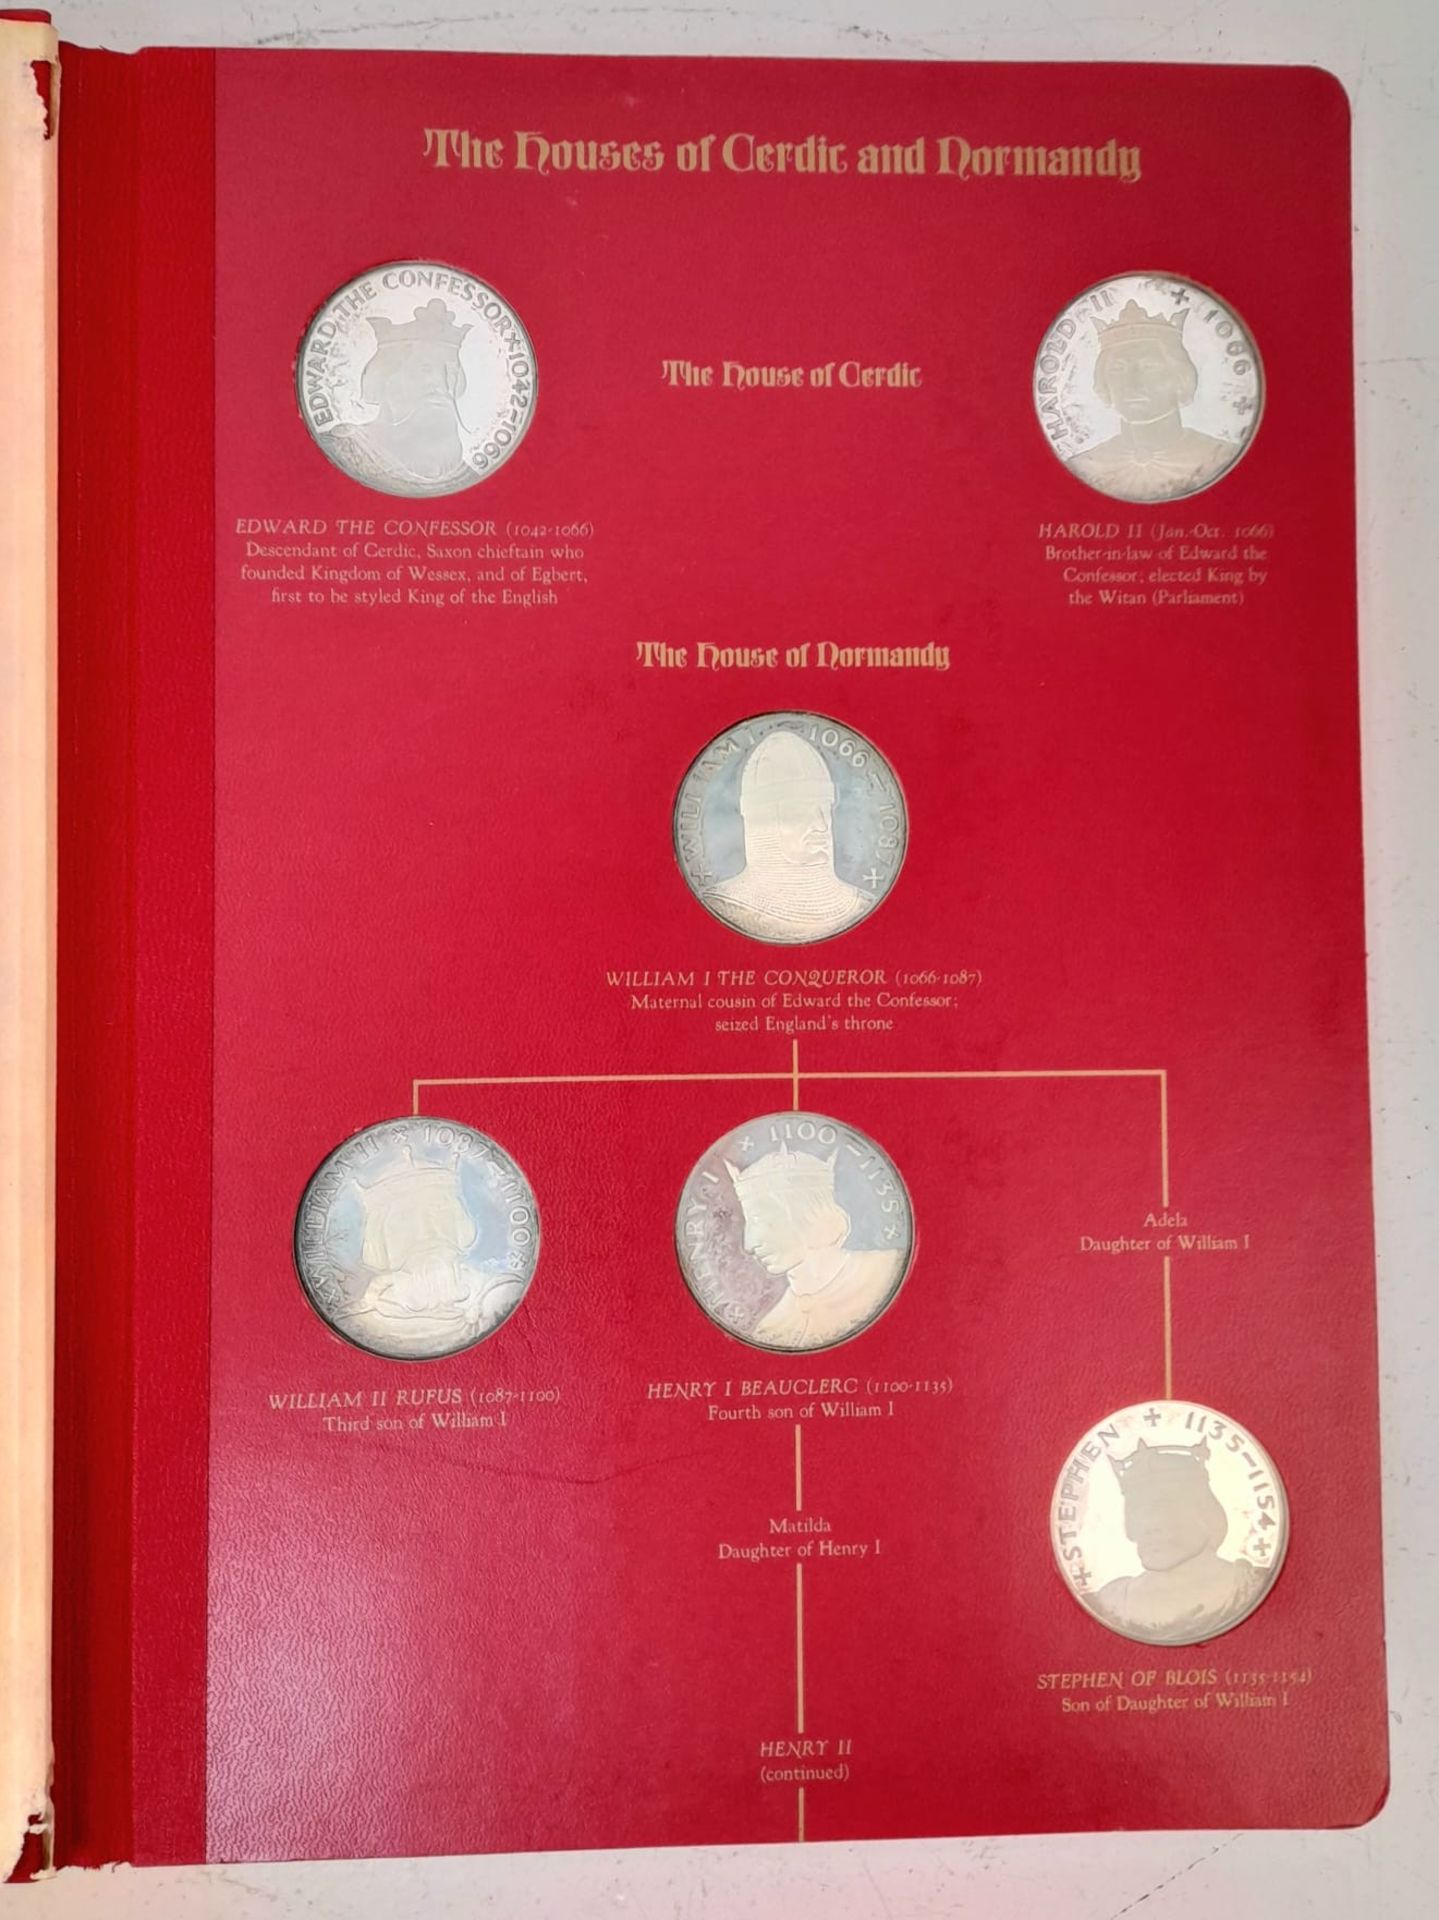 The Kings and Queens of England. First edition sterling silver proof medal set. 43 monarchs in - Image 7 of 8